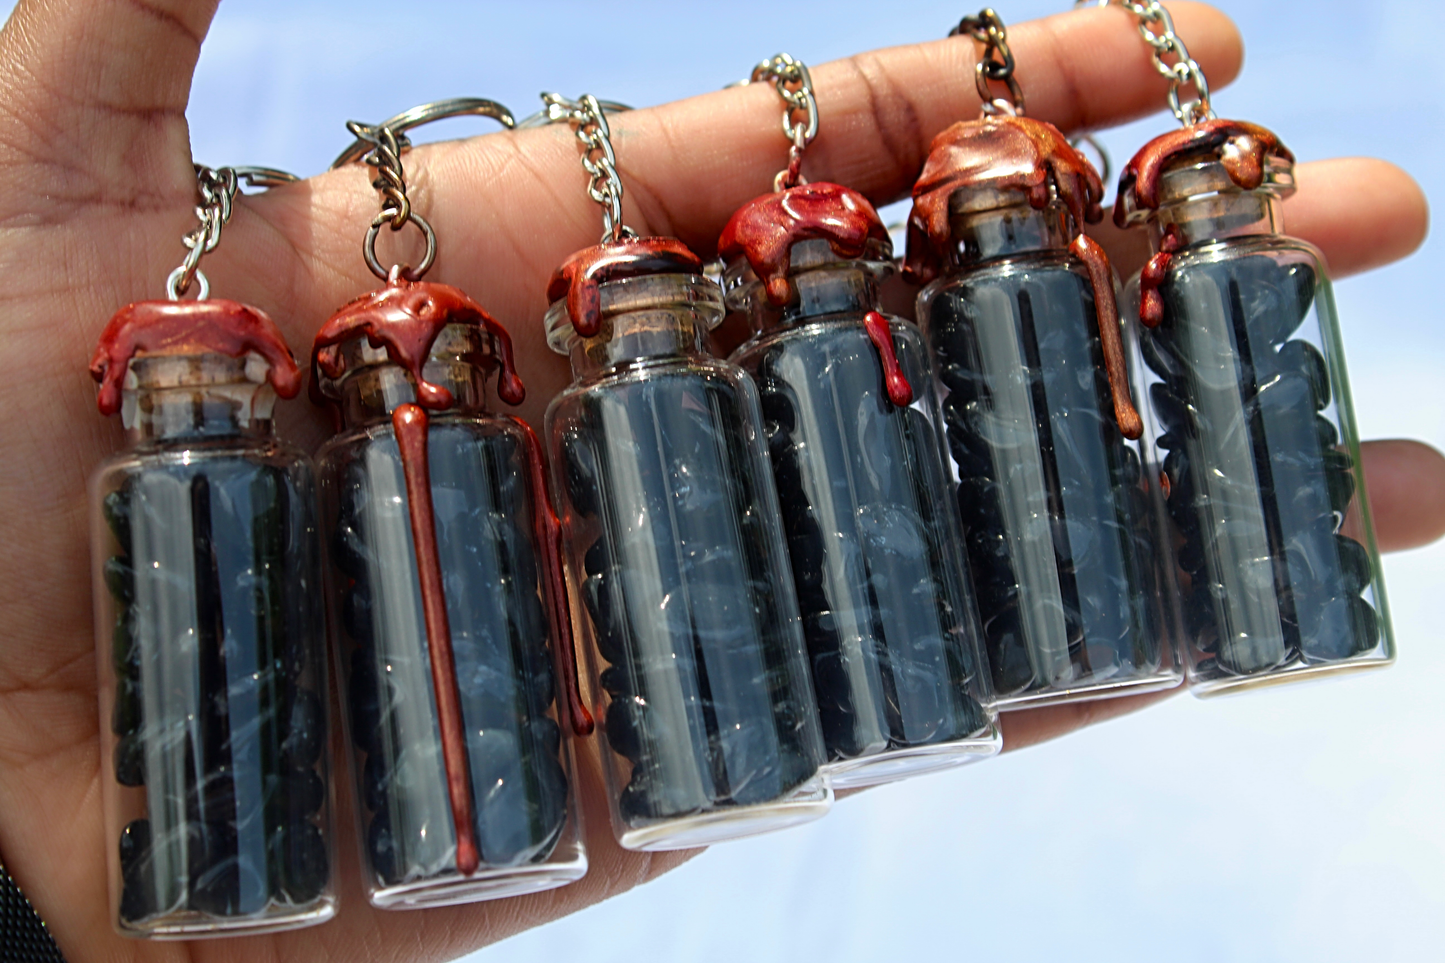 Obsidian, rose quartz, and amethyst crystals inside clear glass jar with wax seals and keychain attachments by gravely goods in a hand outside